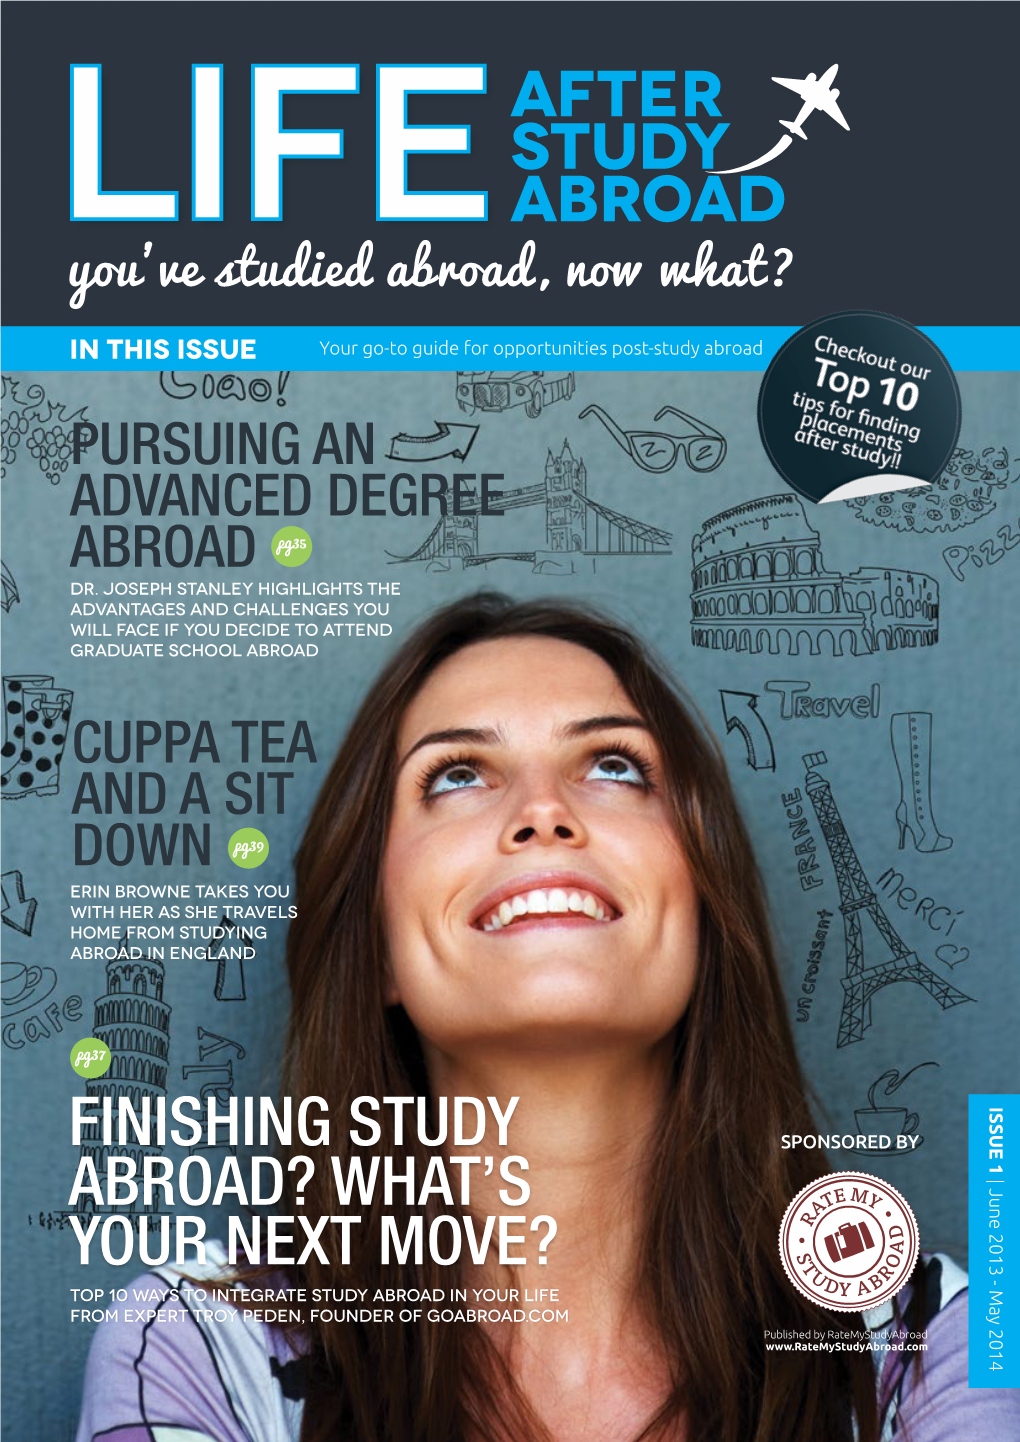 Finishing Study Abroad? What's Your Next Move?